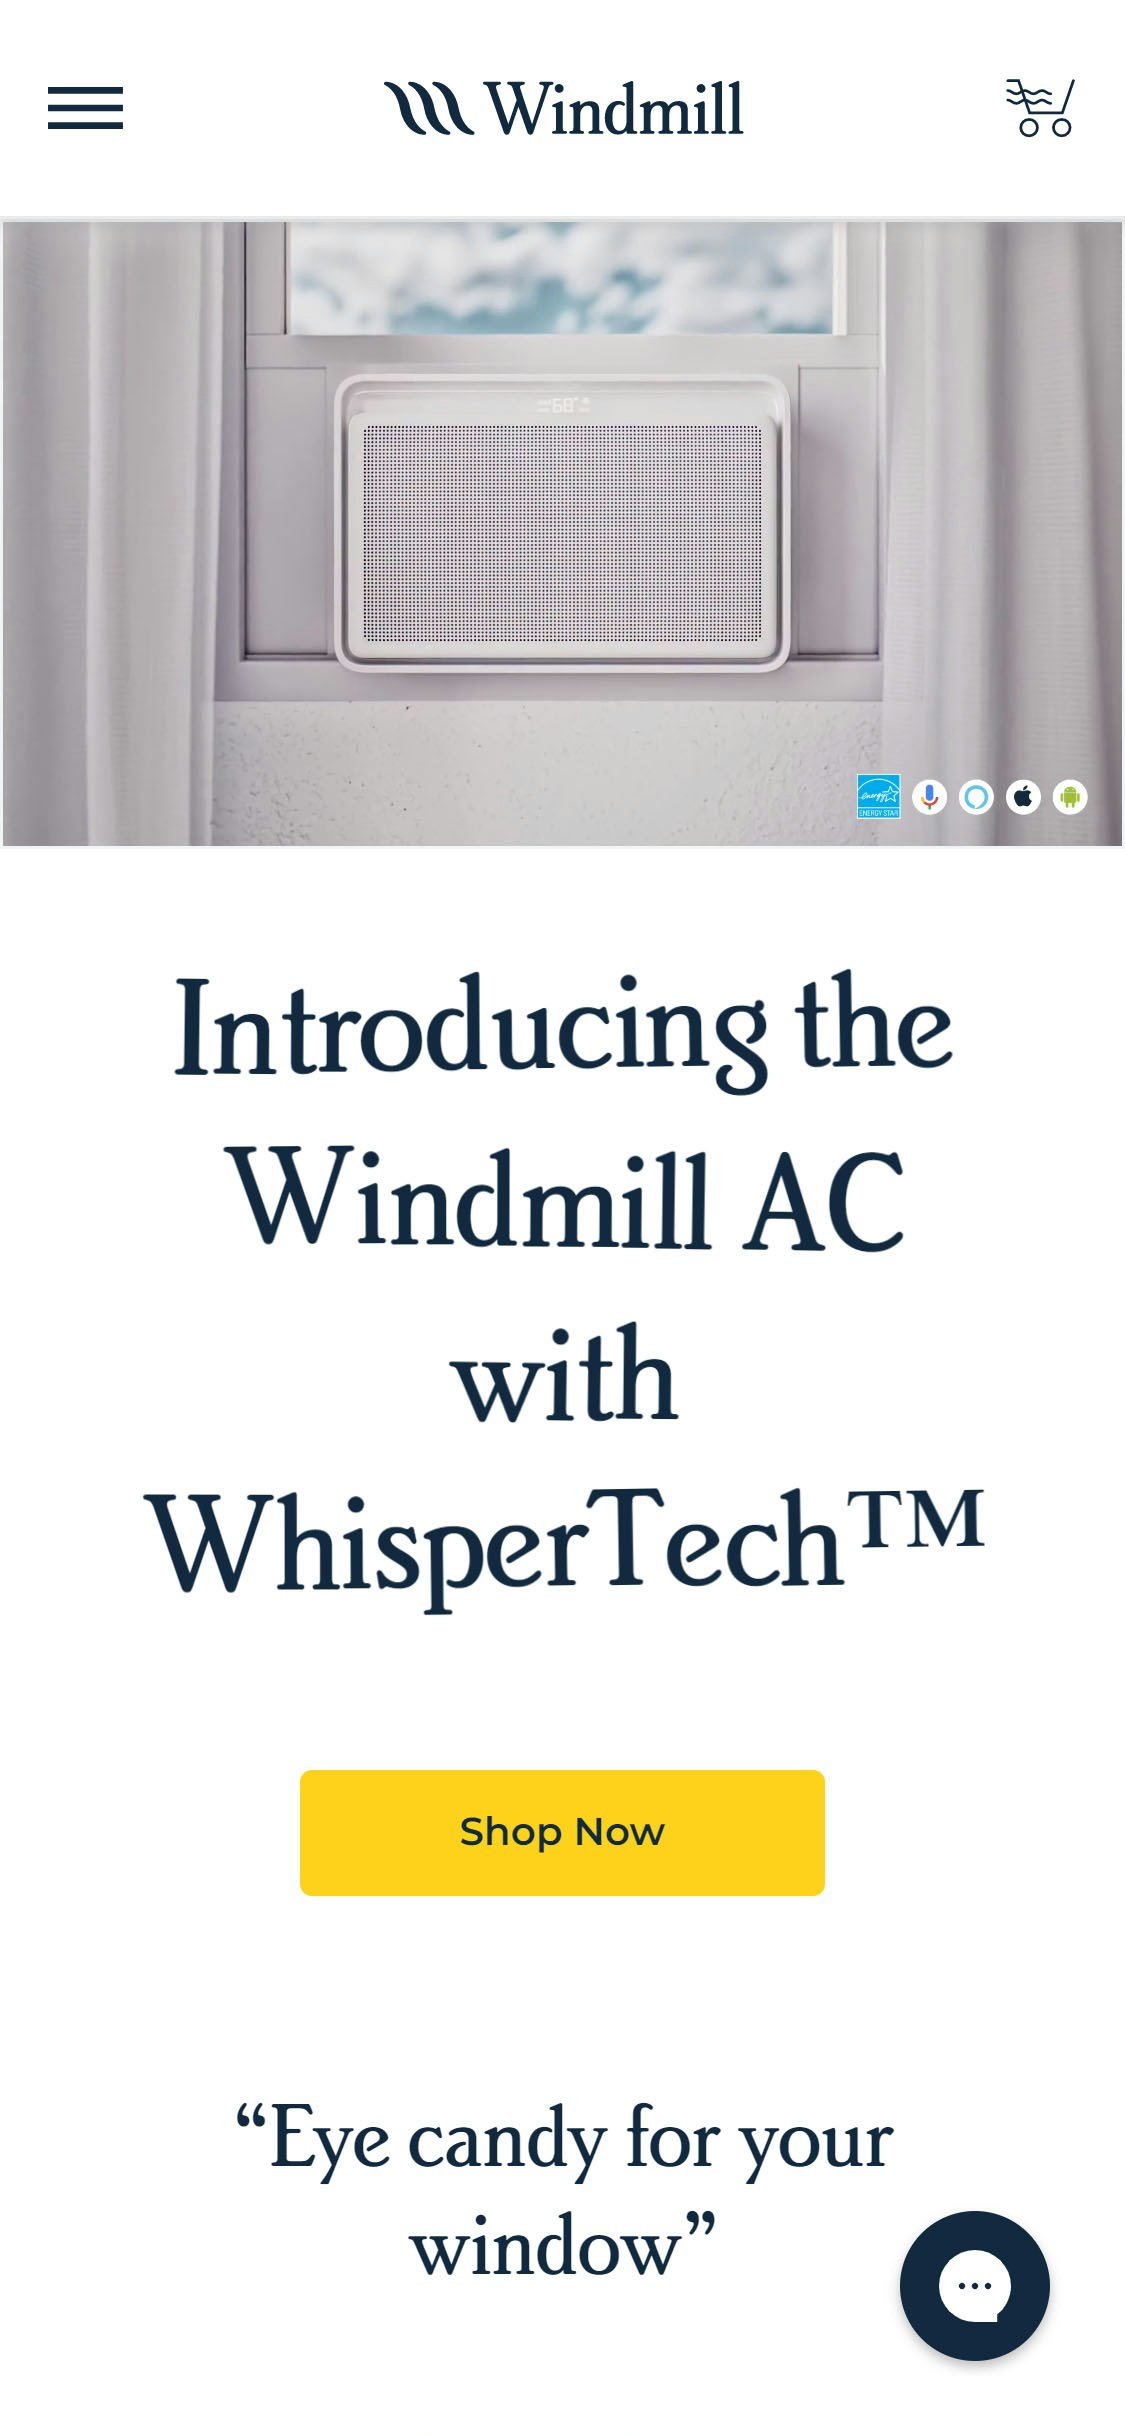 Windmill Air Website (Mobile View)